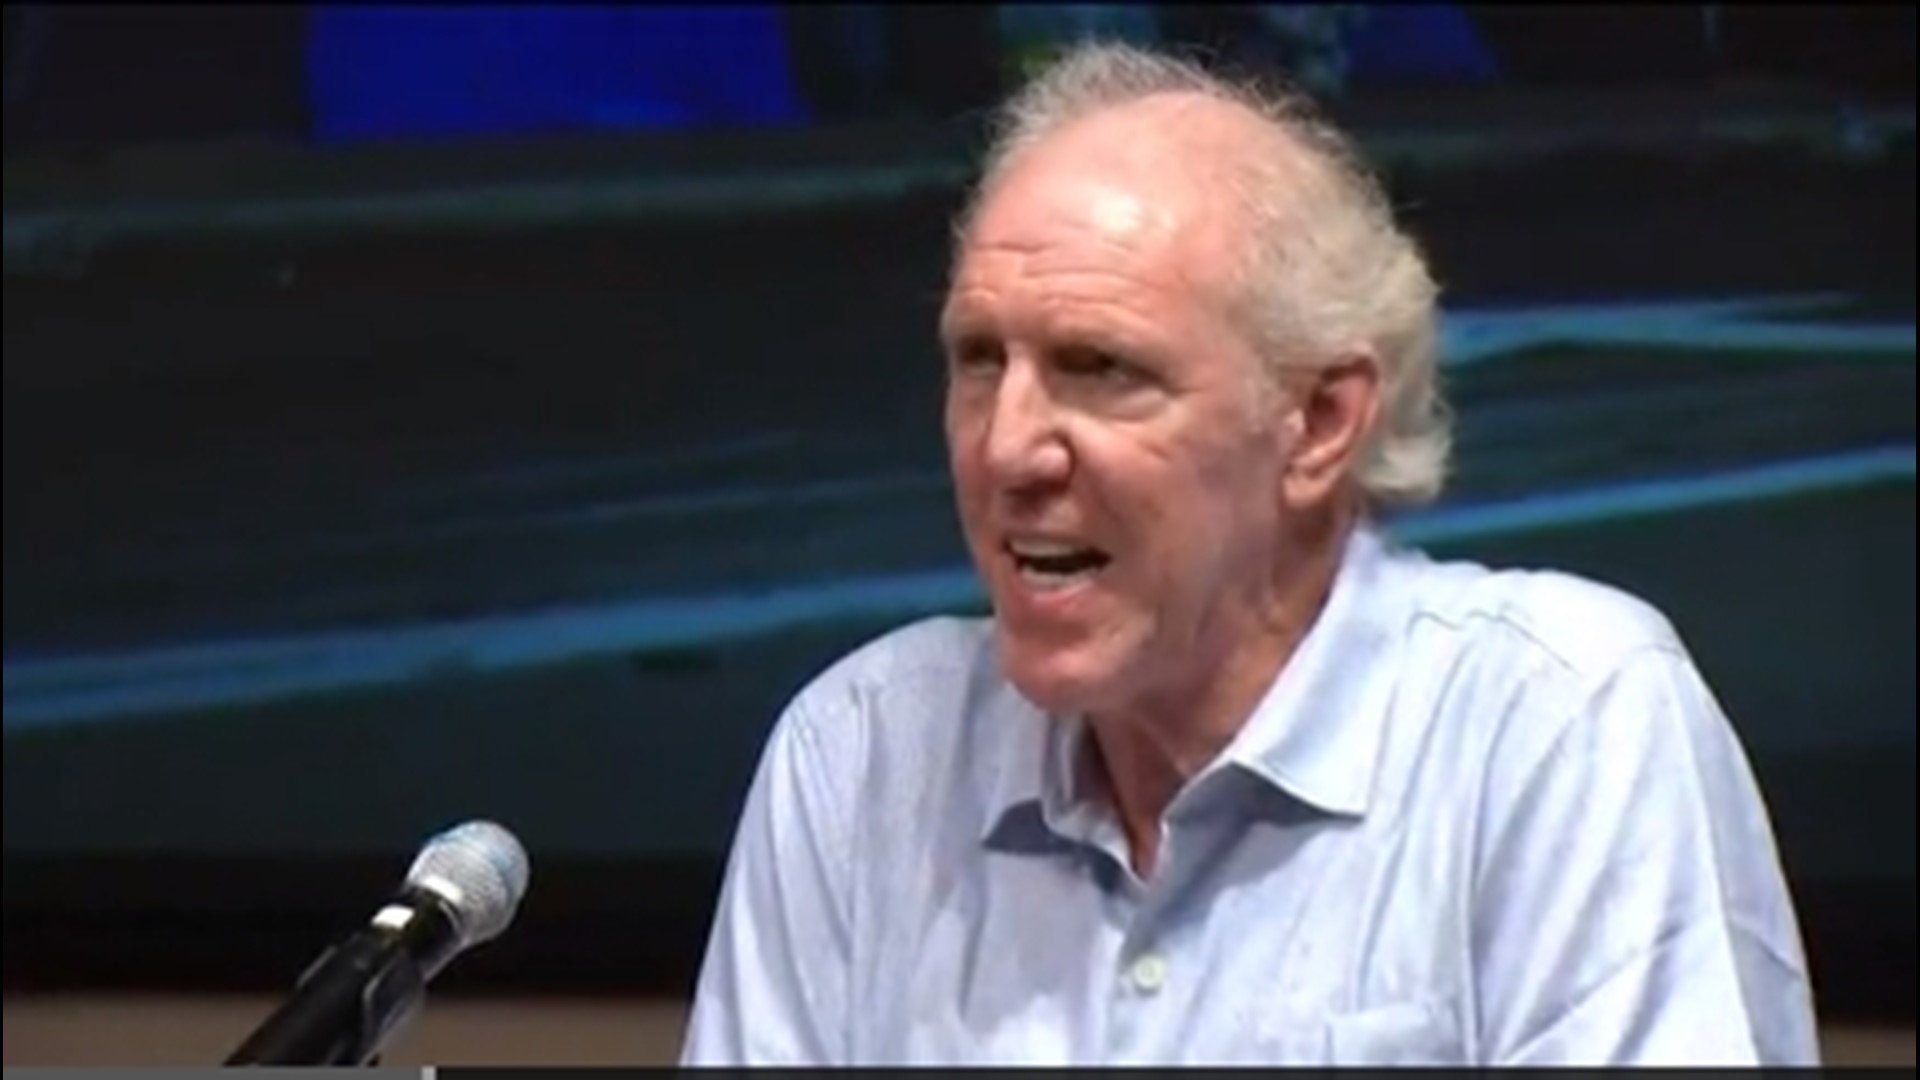 Former NBA star Bill Walton took part in a news conference with the Lucky Duck Foundation to address the issue of homelessness in San Diego and took aim at the mayor